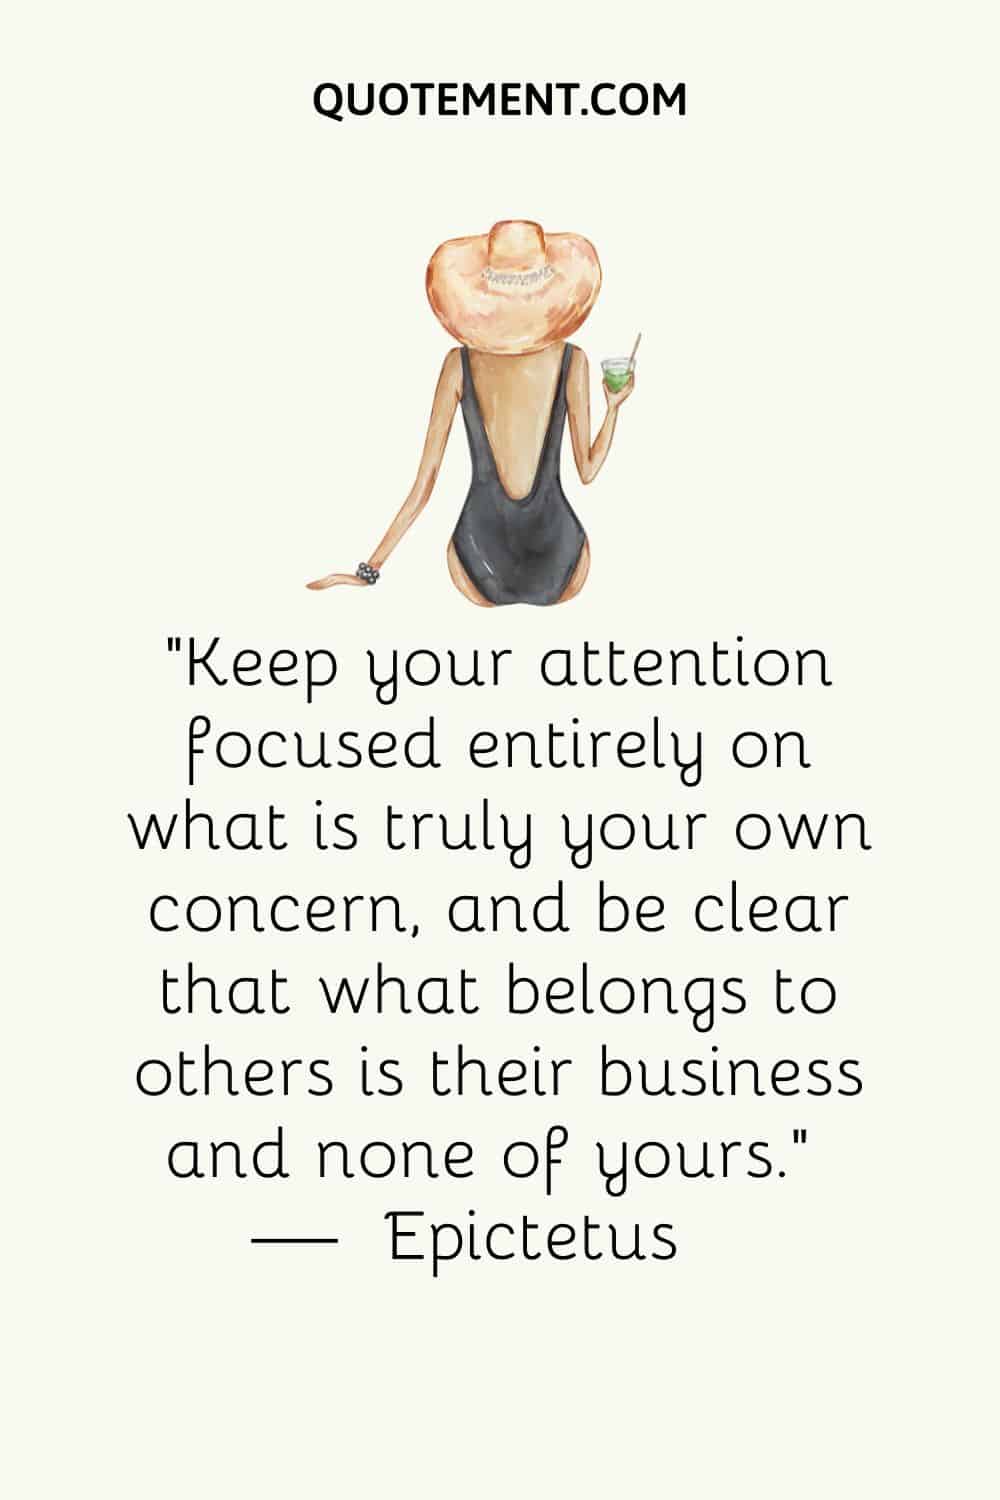 Keep your attention focused entirely on what is truly your own concern, and be clear that what belongs to others is their business and none of yours